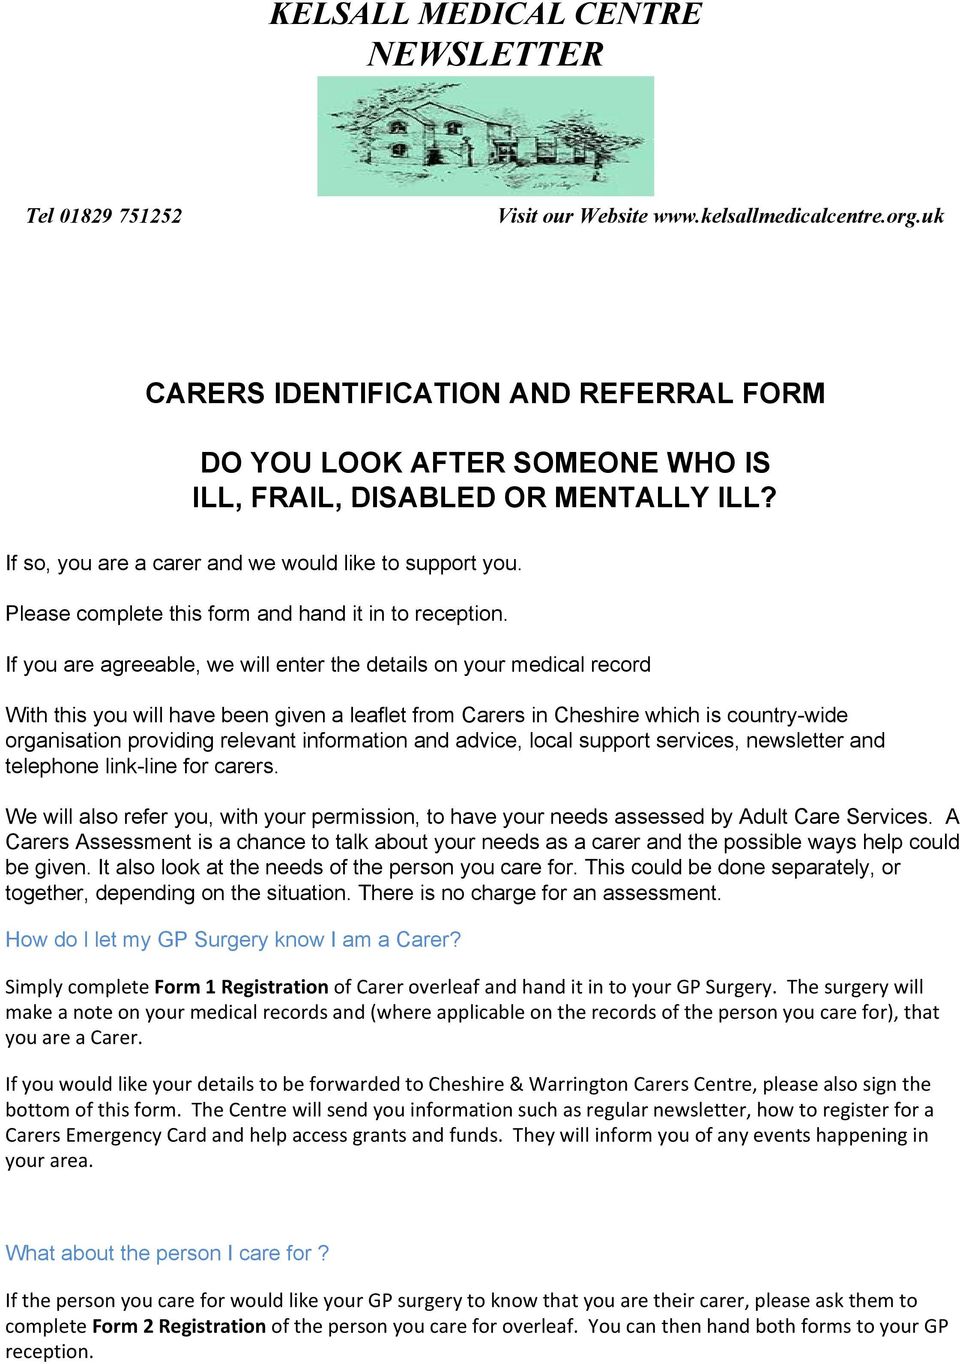 If you are agreeable, we will enter the details on your medical record With this you will have been given a leaflet from Carers in Cheshire which is country wide organisation providing relevant